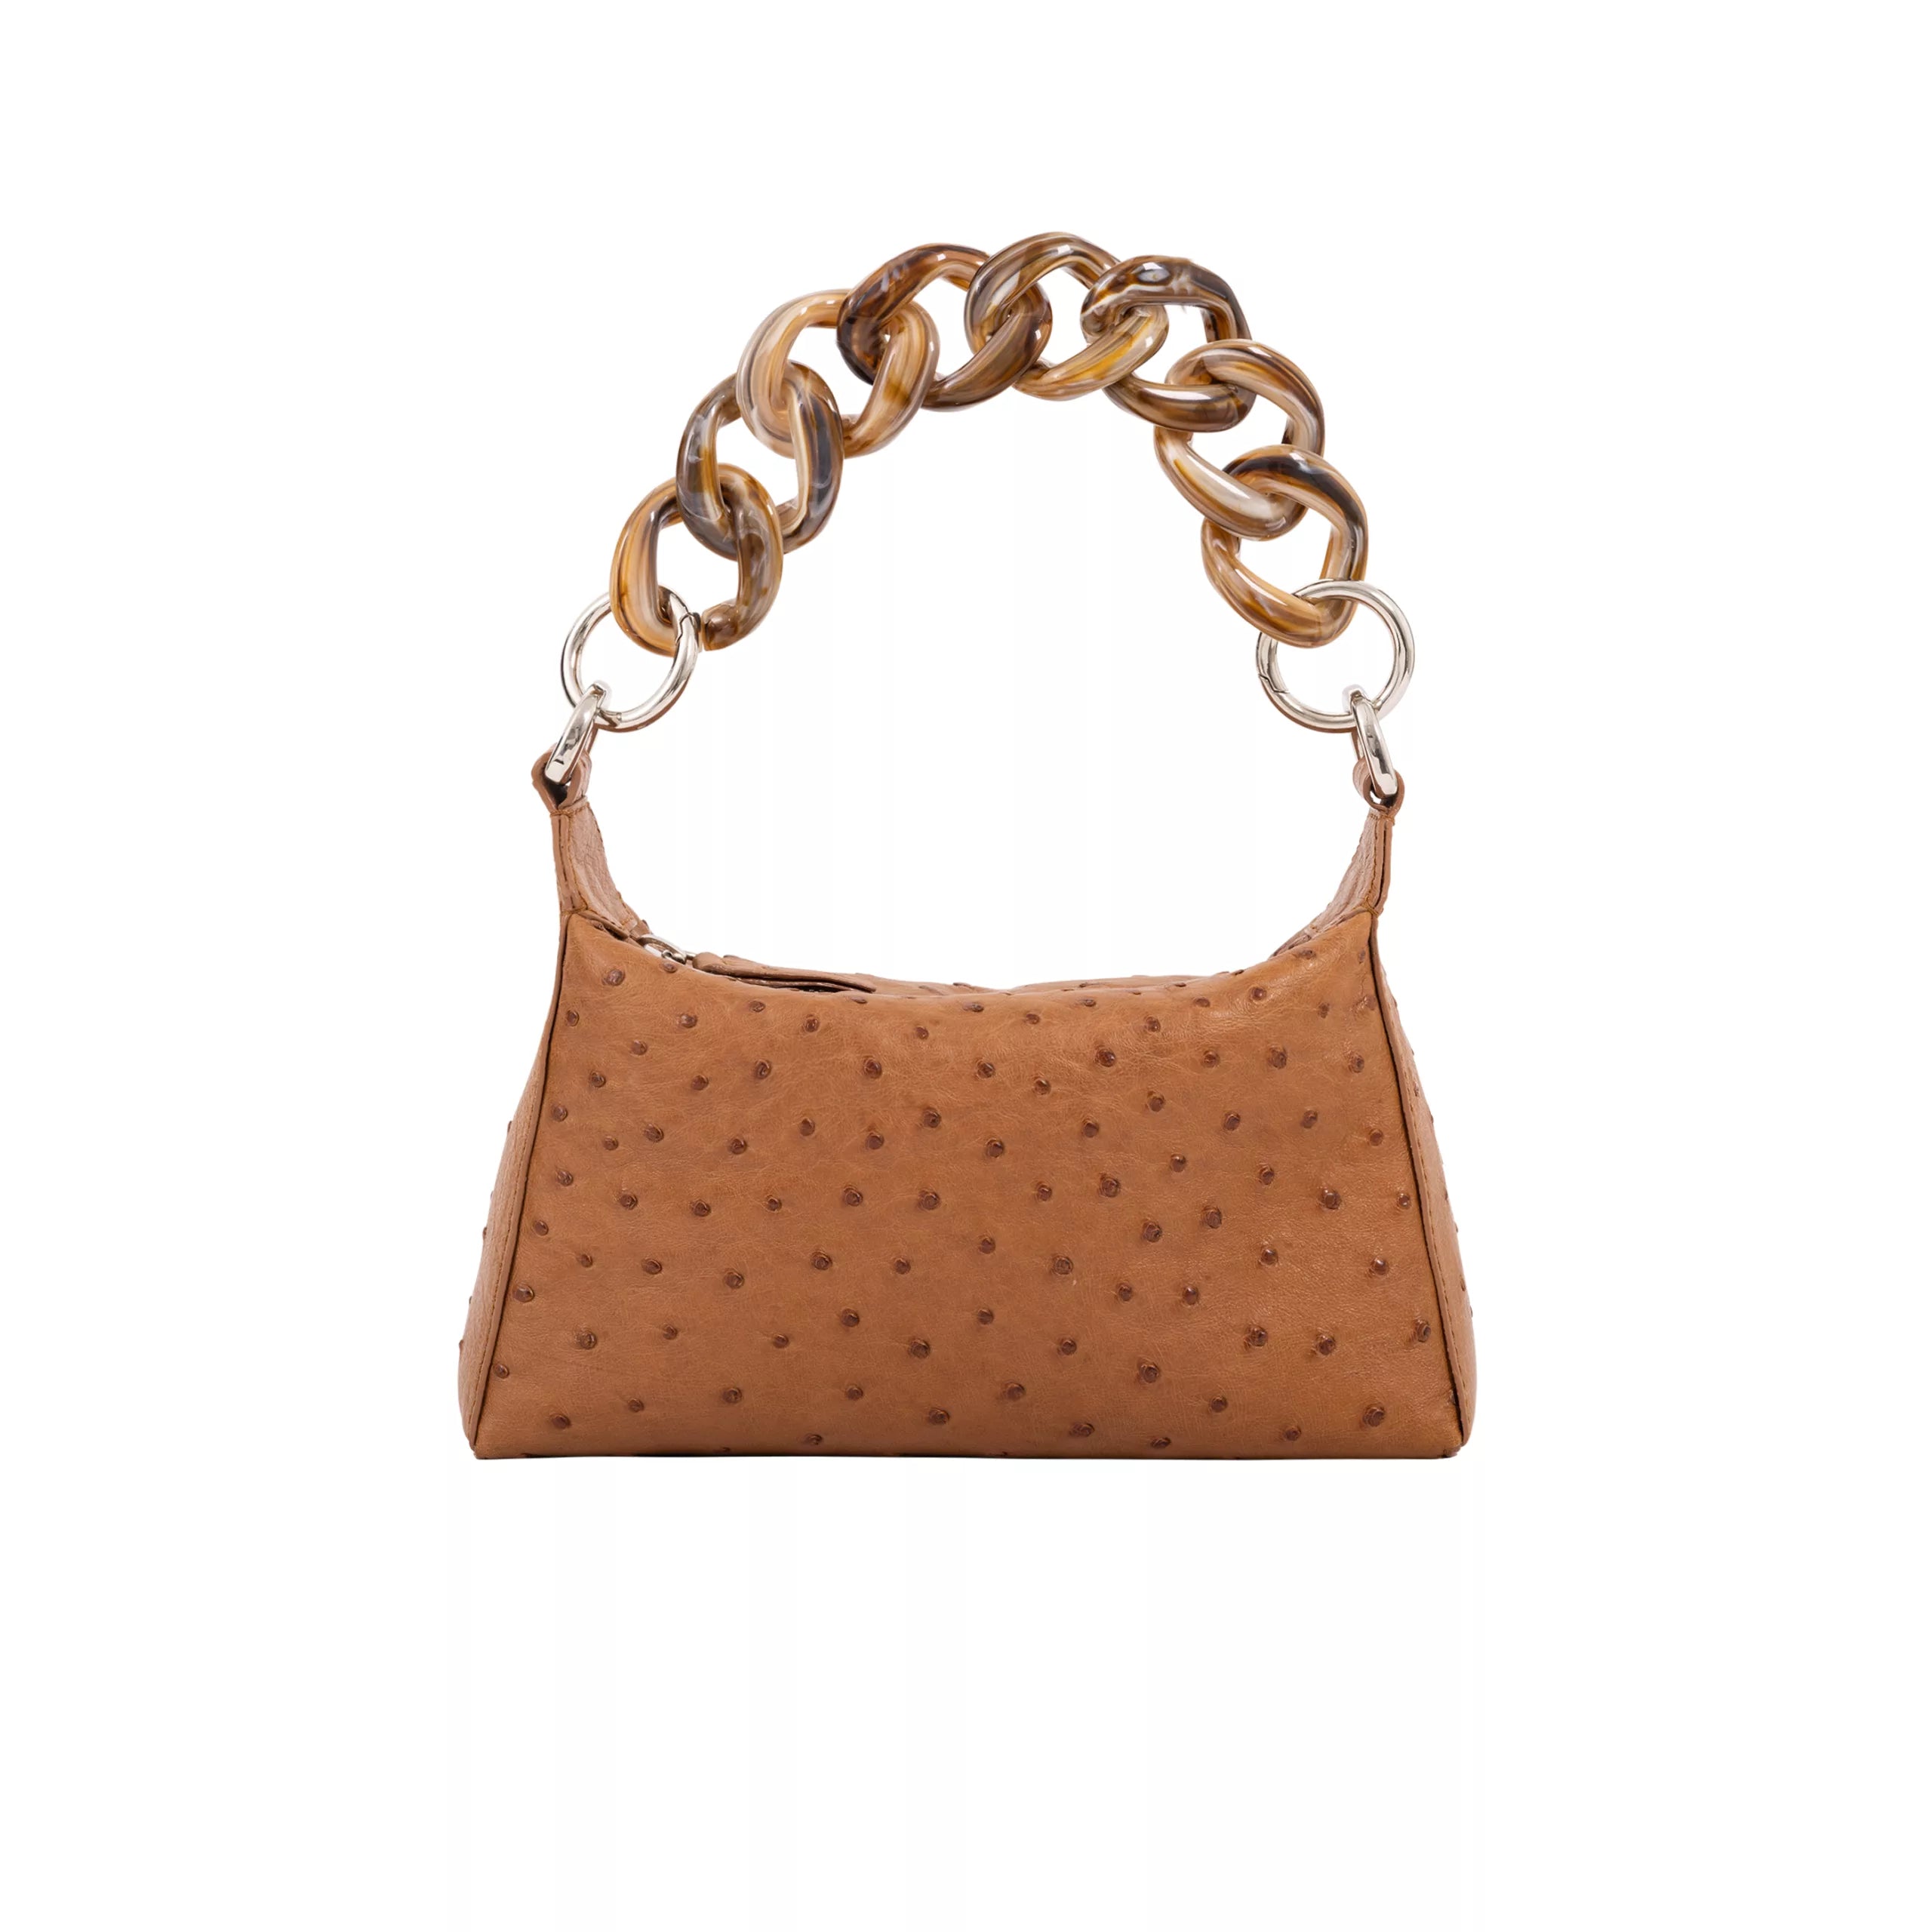 Lola in Luggage Ostrich with a Caramel Resin Chain by Cape Cobra